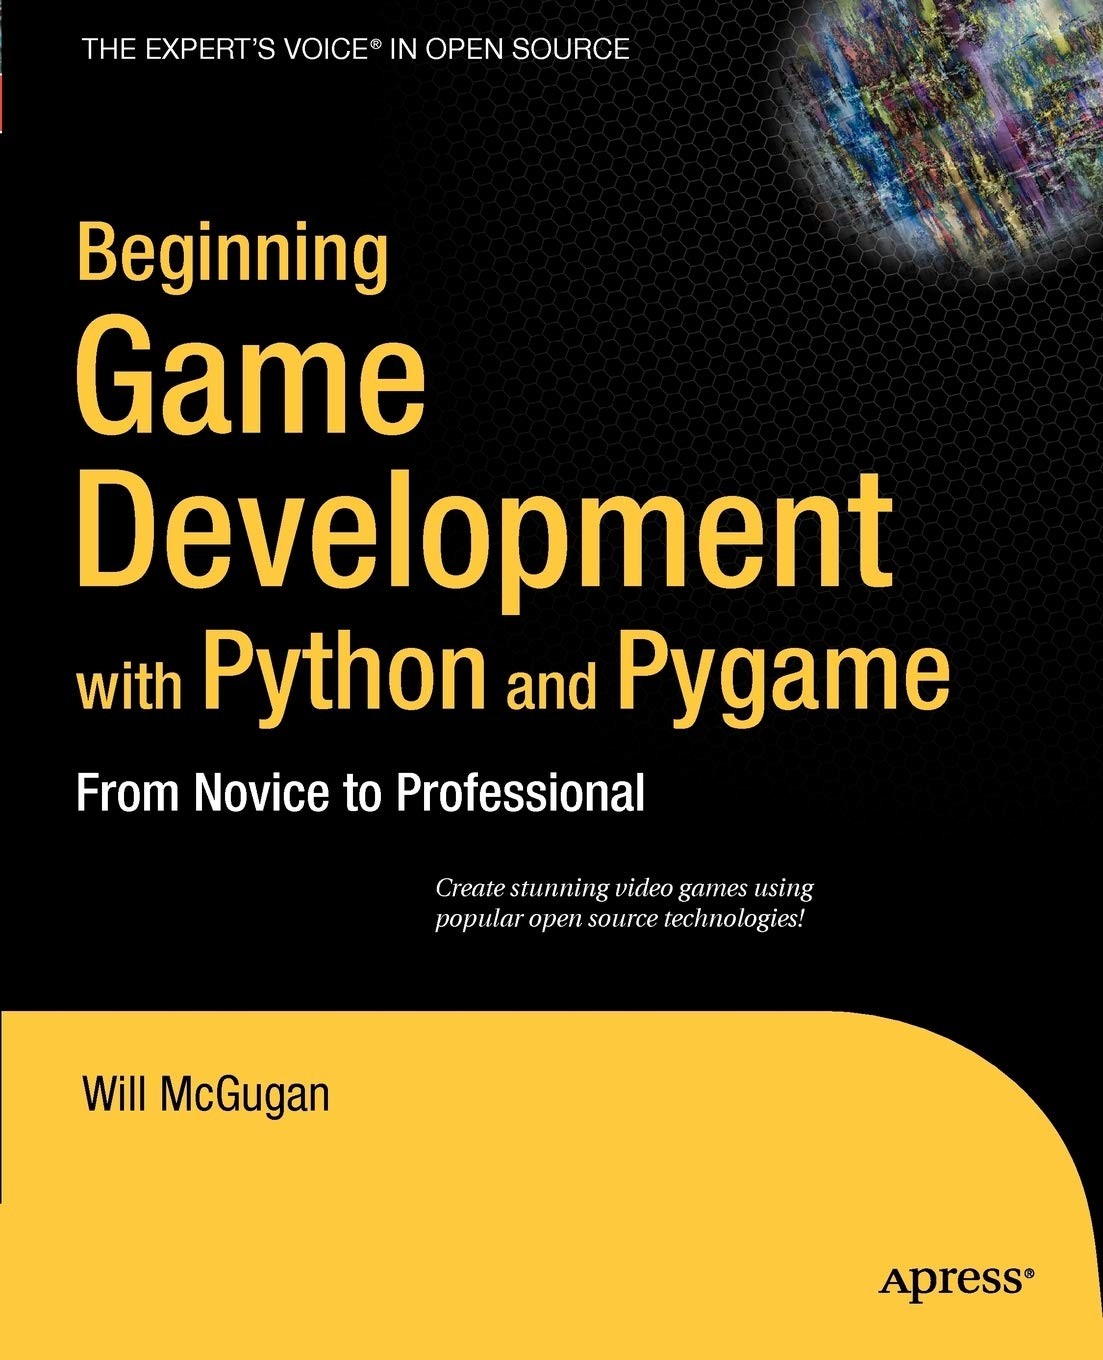 Beginning Game Development With Python and Pygame: From Novice to Professional